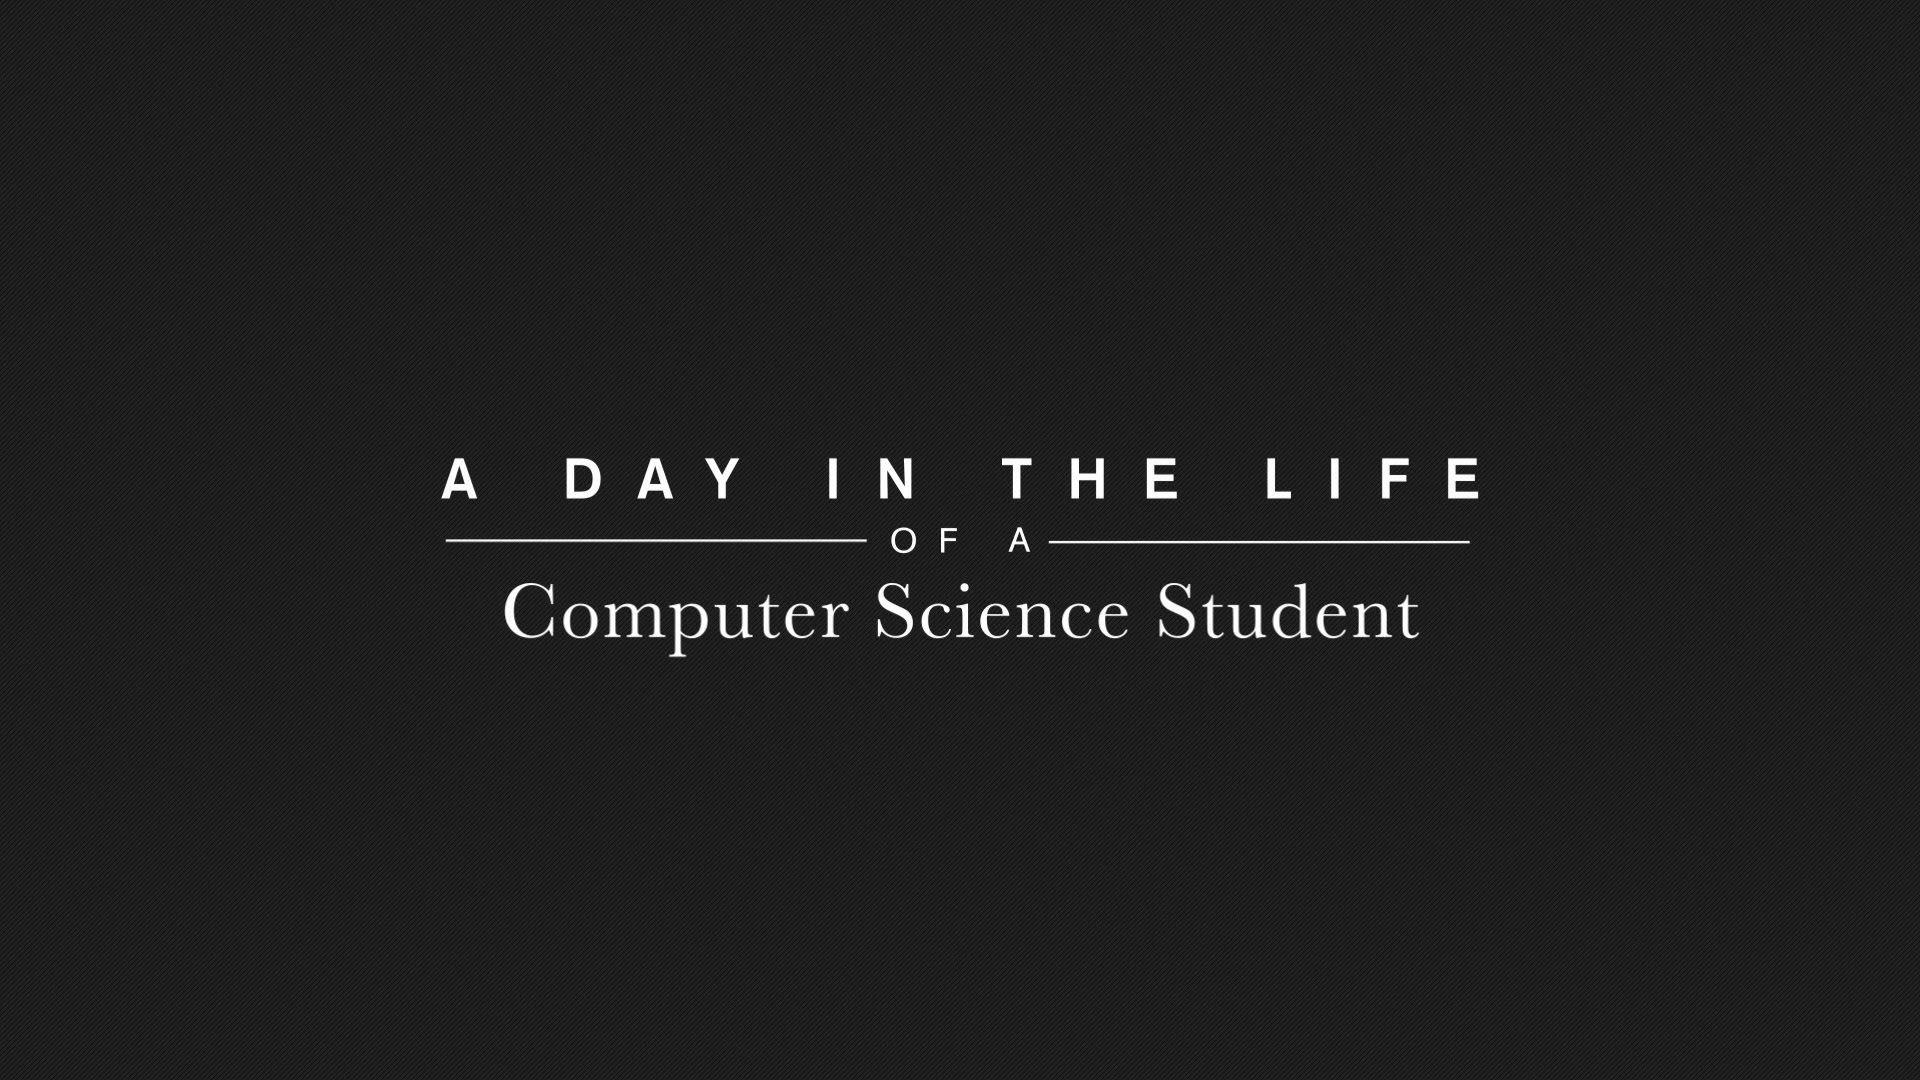 A Day in the Life of a Computer Science Student